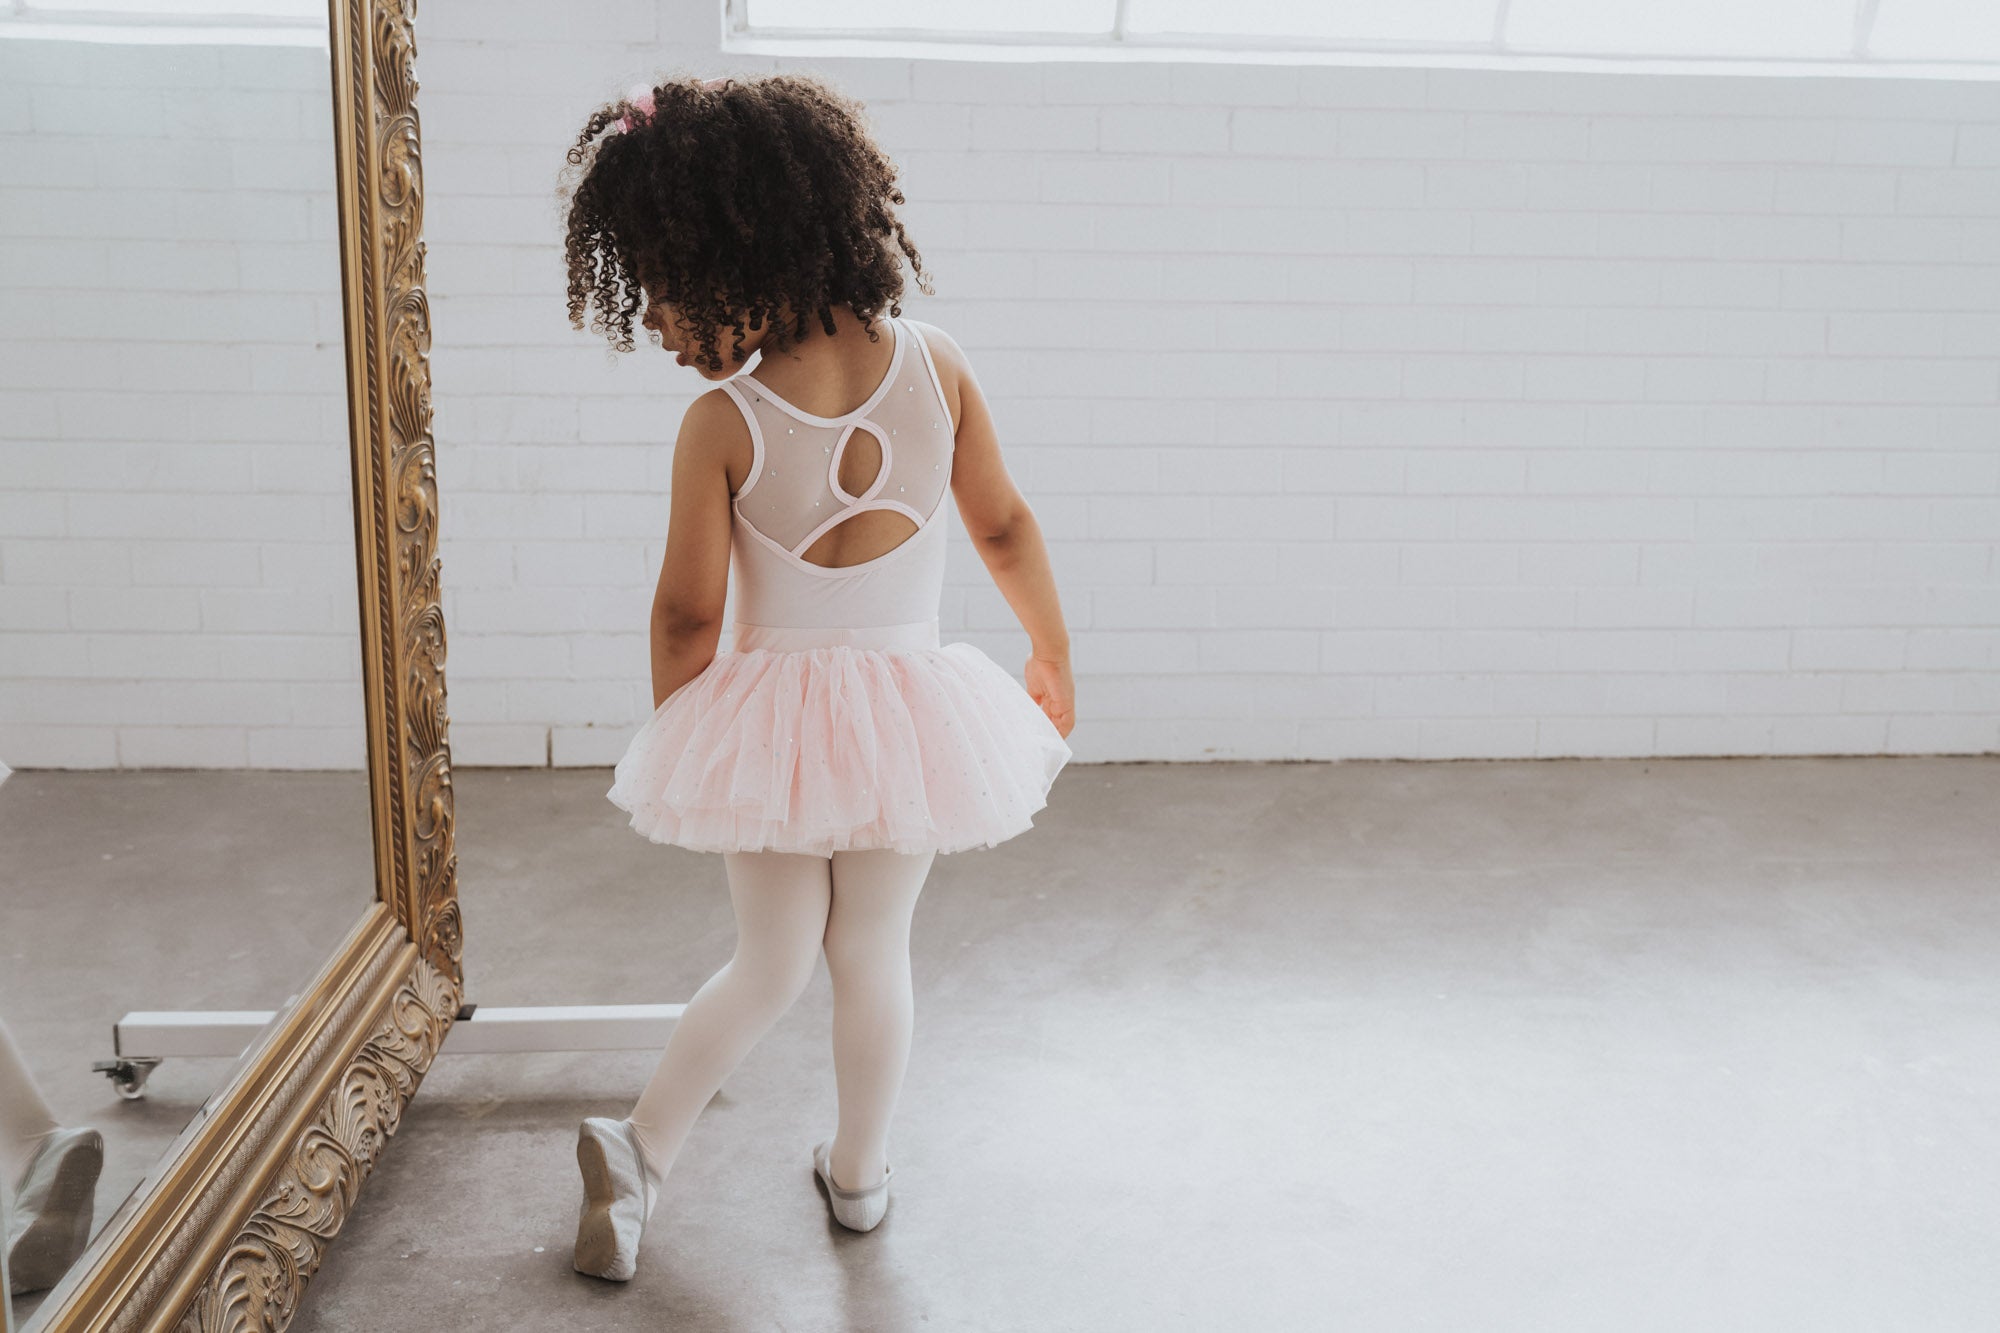 A Passion for Tutus